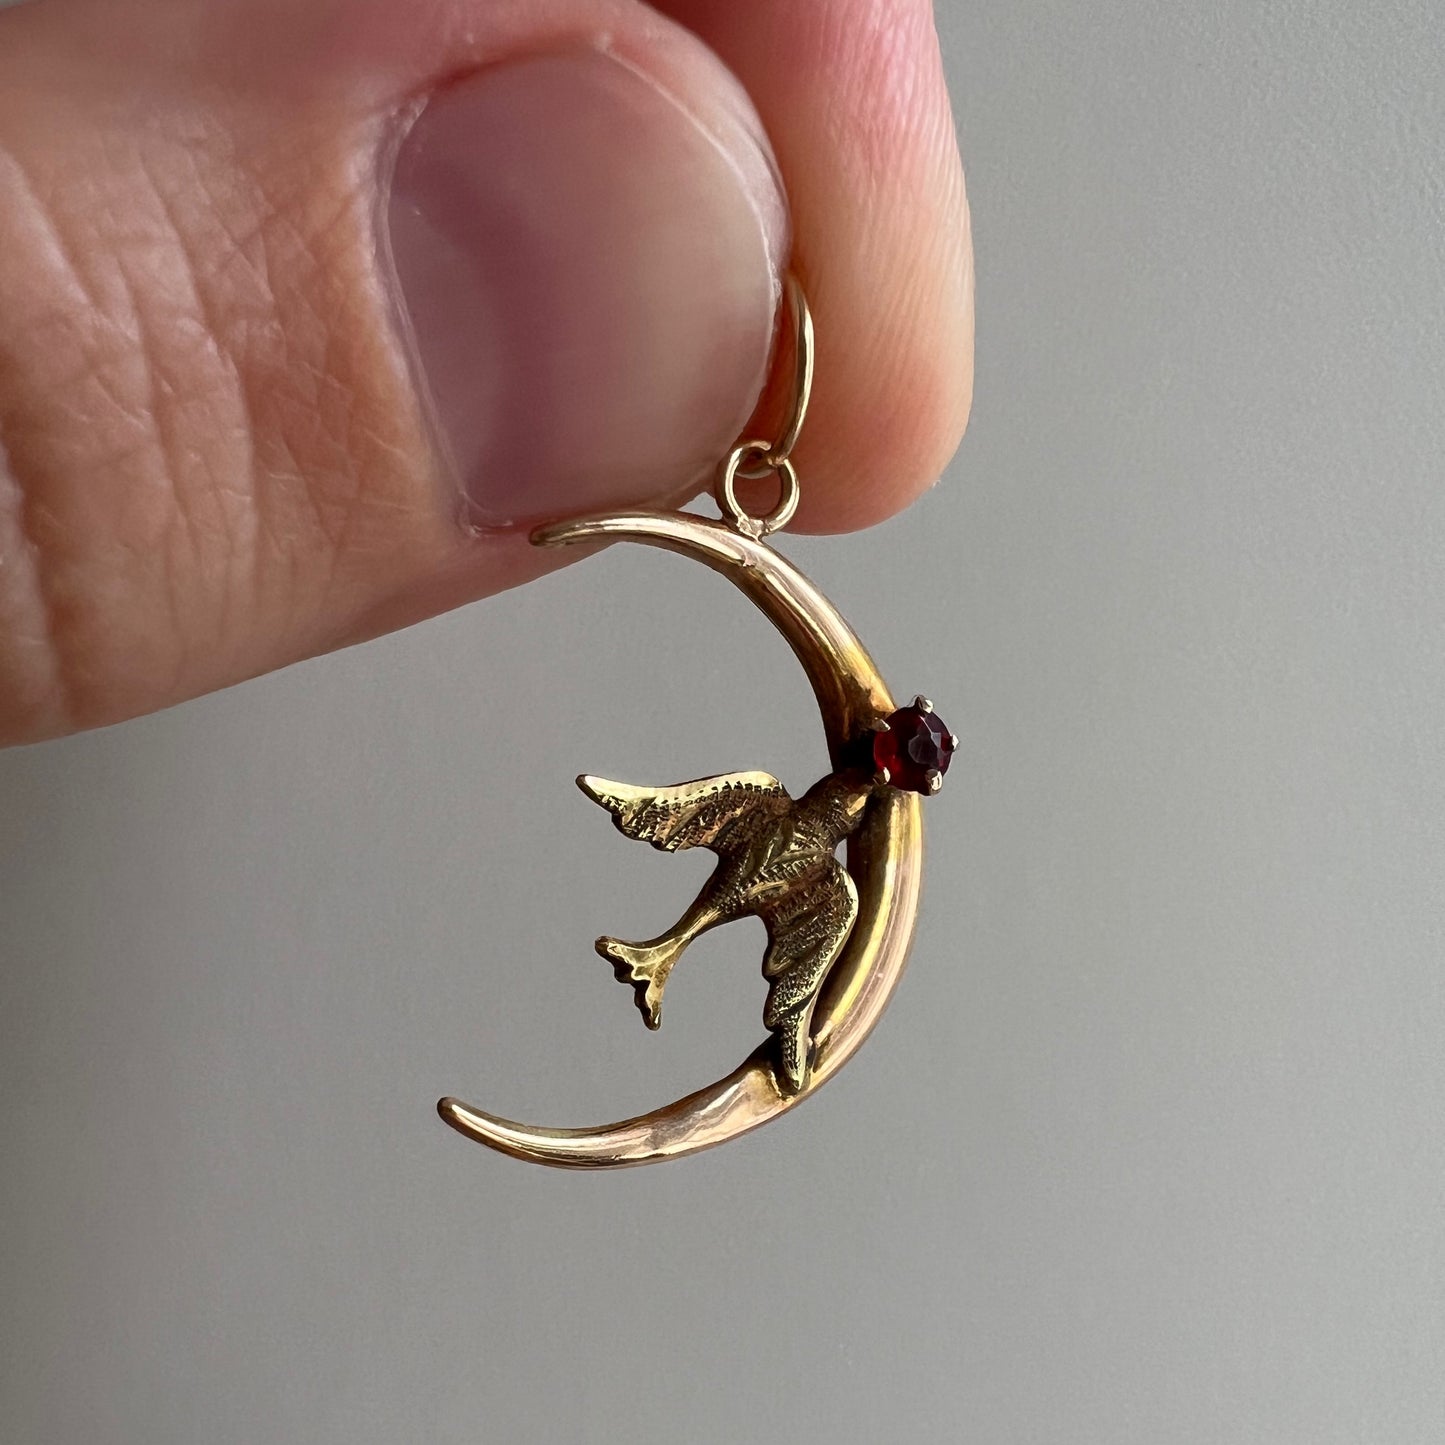 reimagined V I N T A G E // swallow eclipse / 10k crescent moon and bird pendant